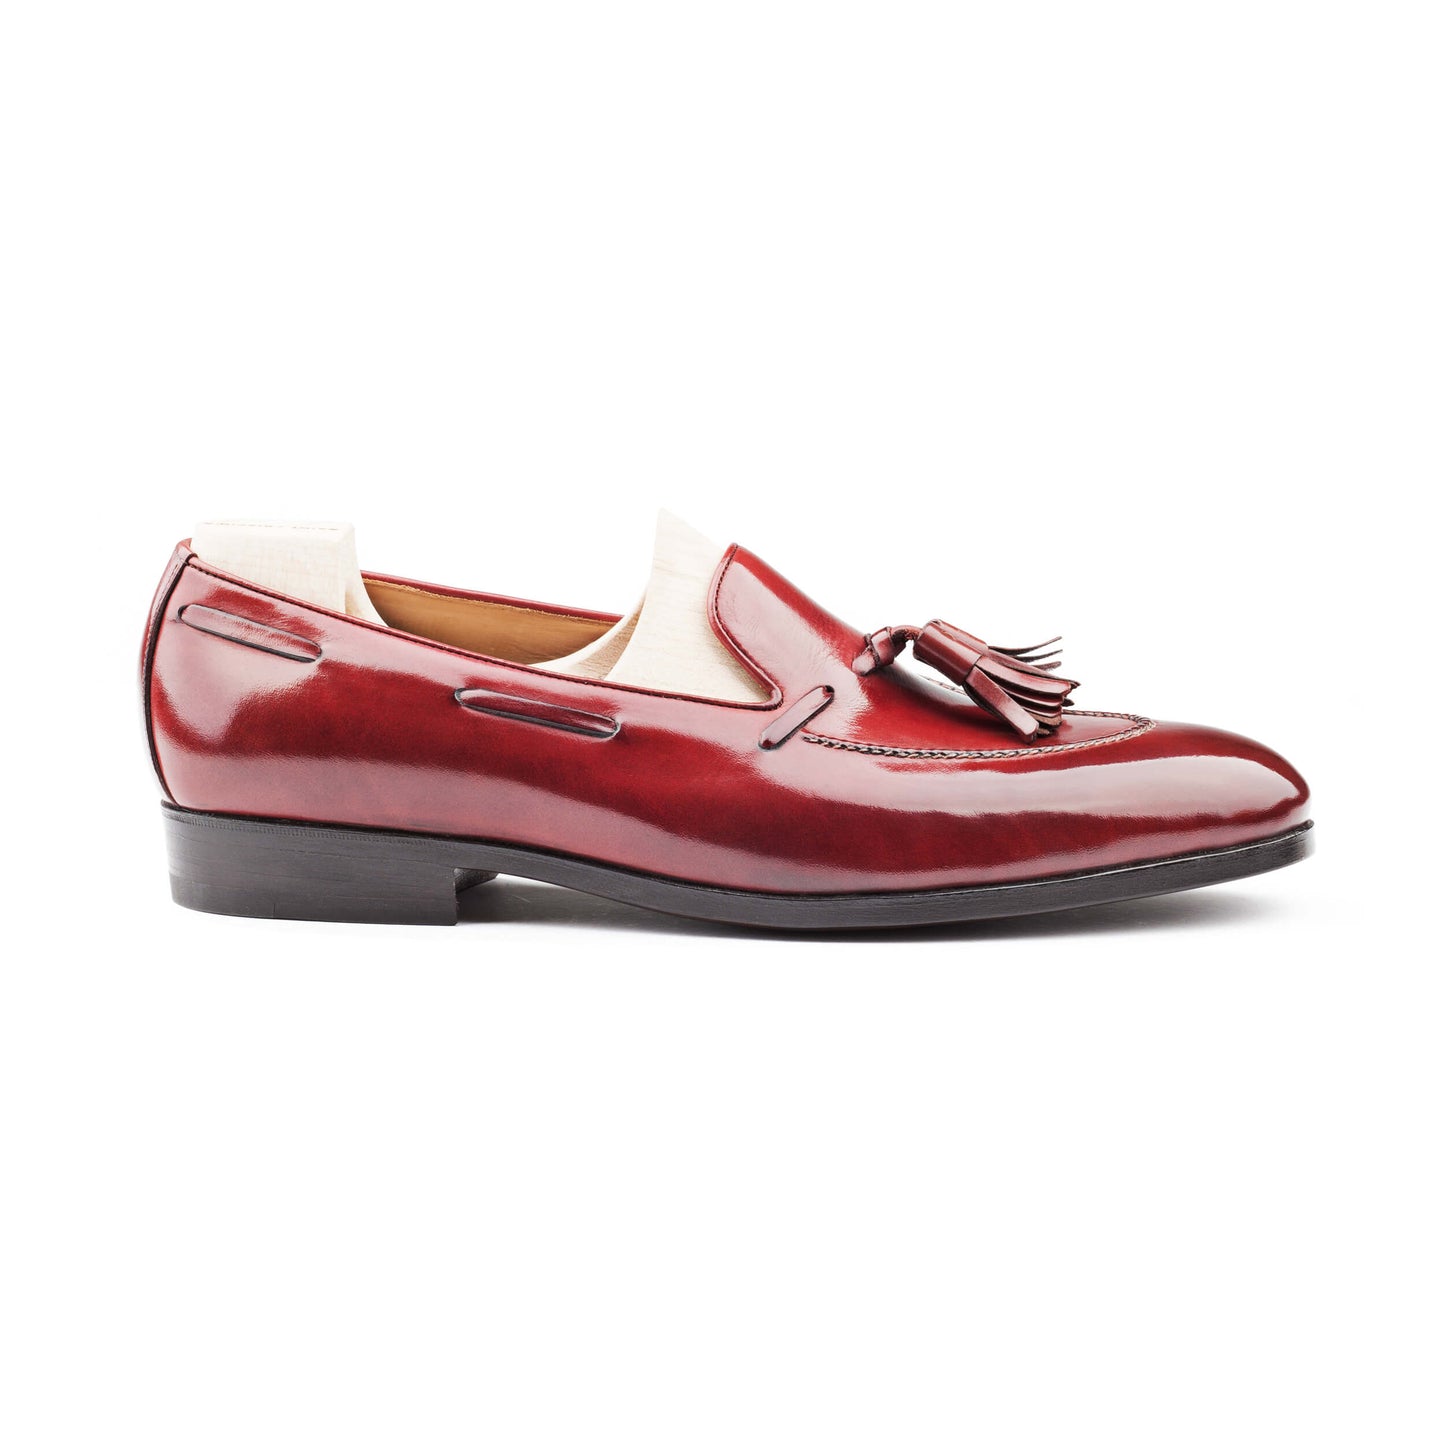 Tassel Loafer with hand stitched apron, short vamp